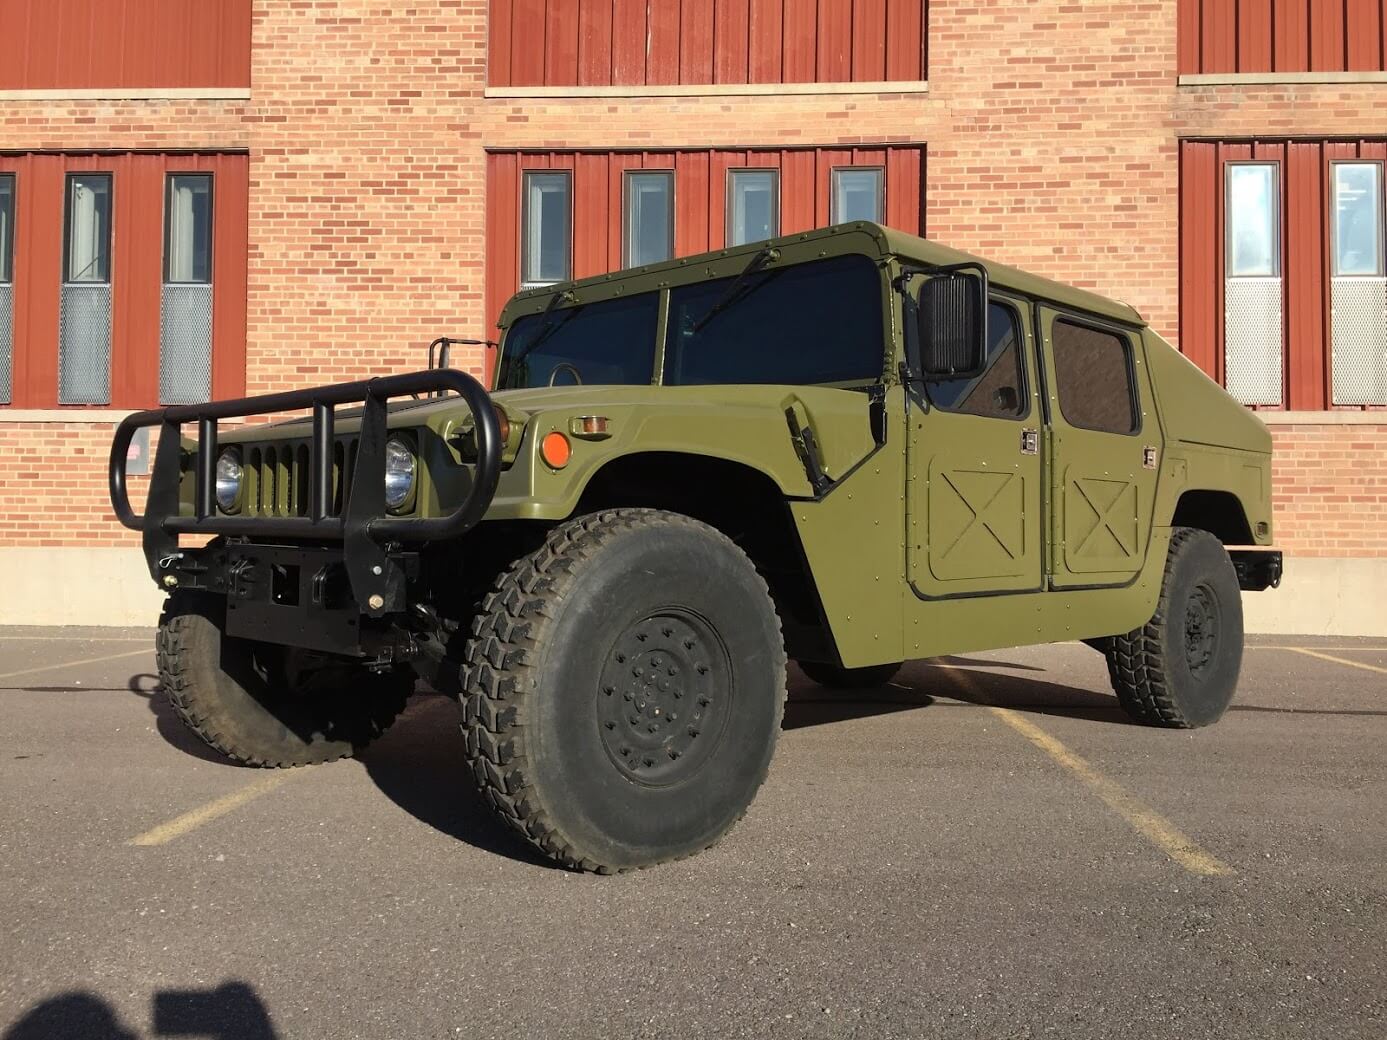 Reasons To Get A Military Humvee Right Now